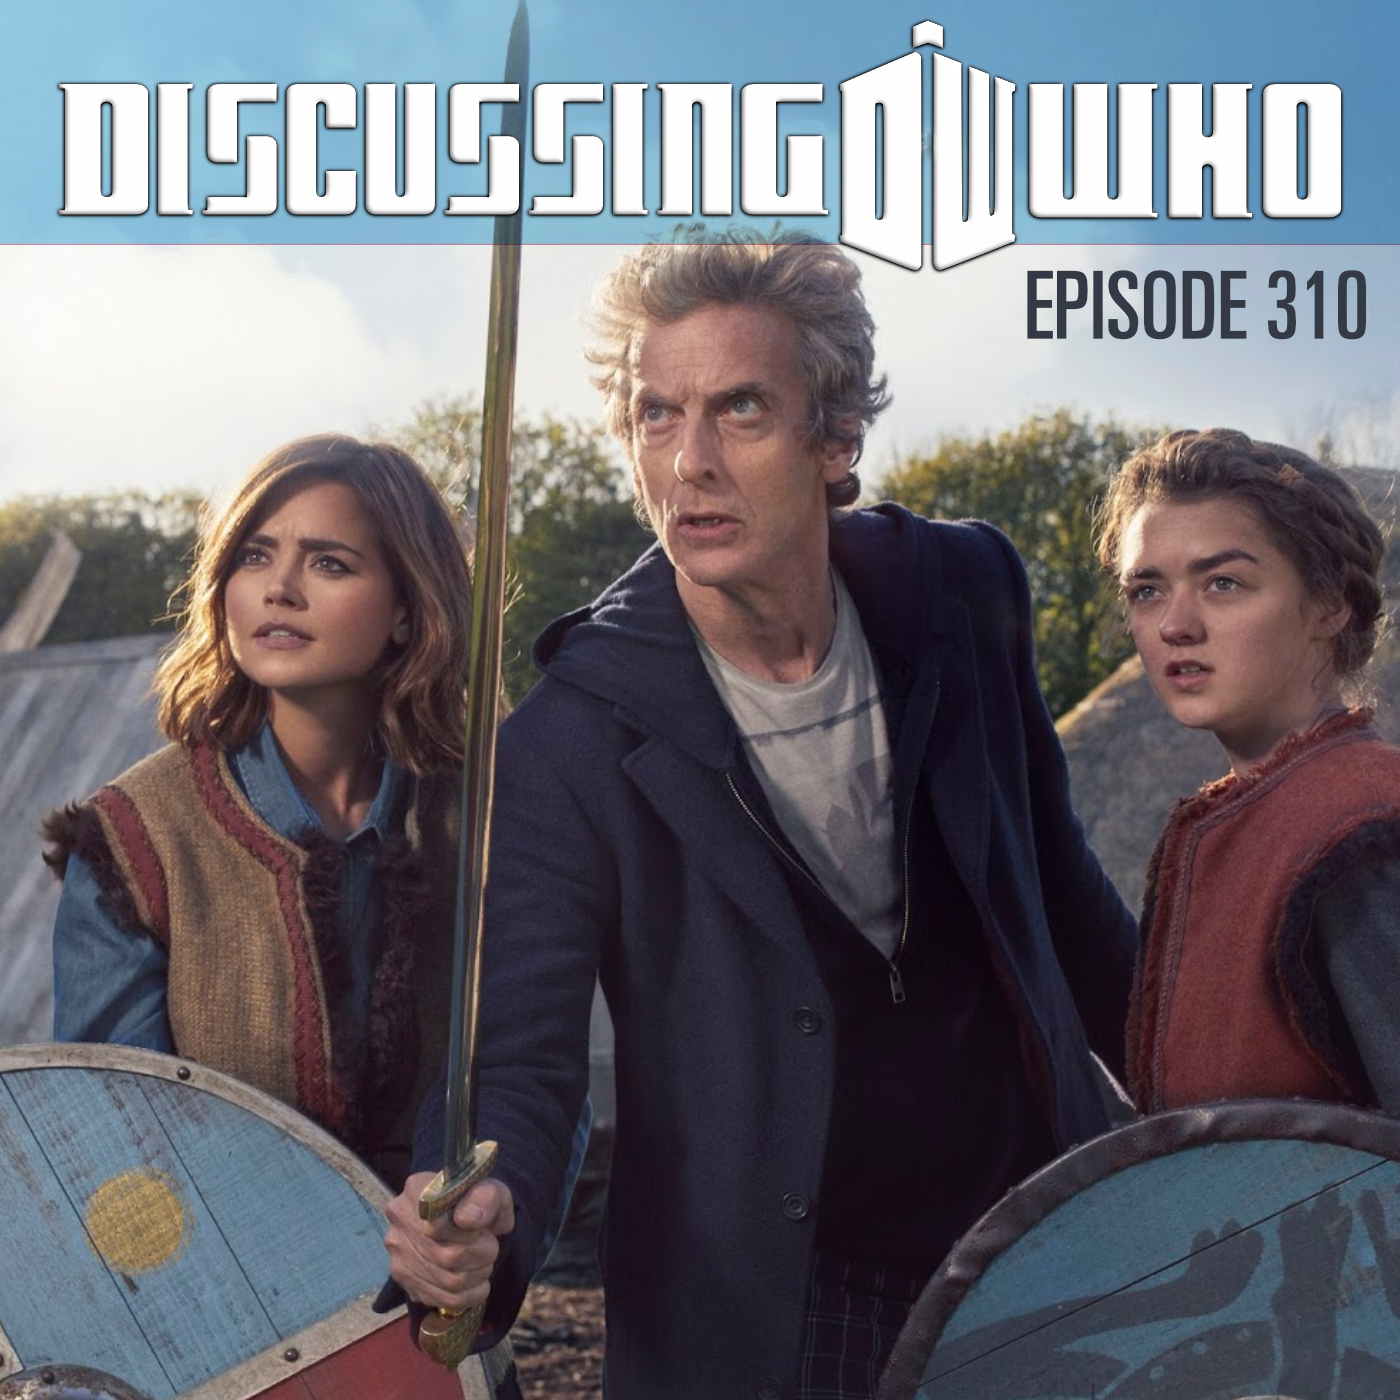 Episode 310: Review of The Girl Who Died, Doctor Who Series 9 Episode 5